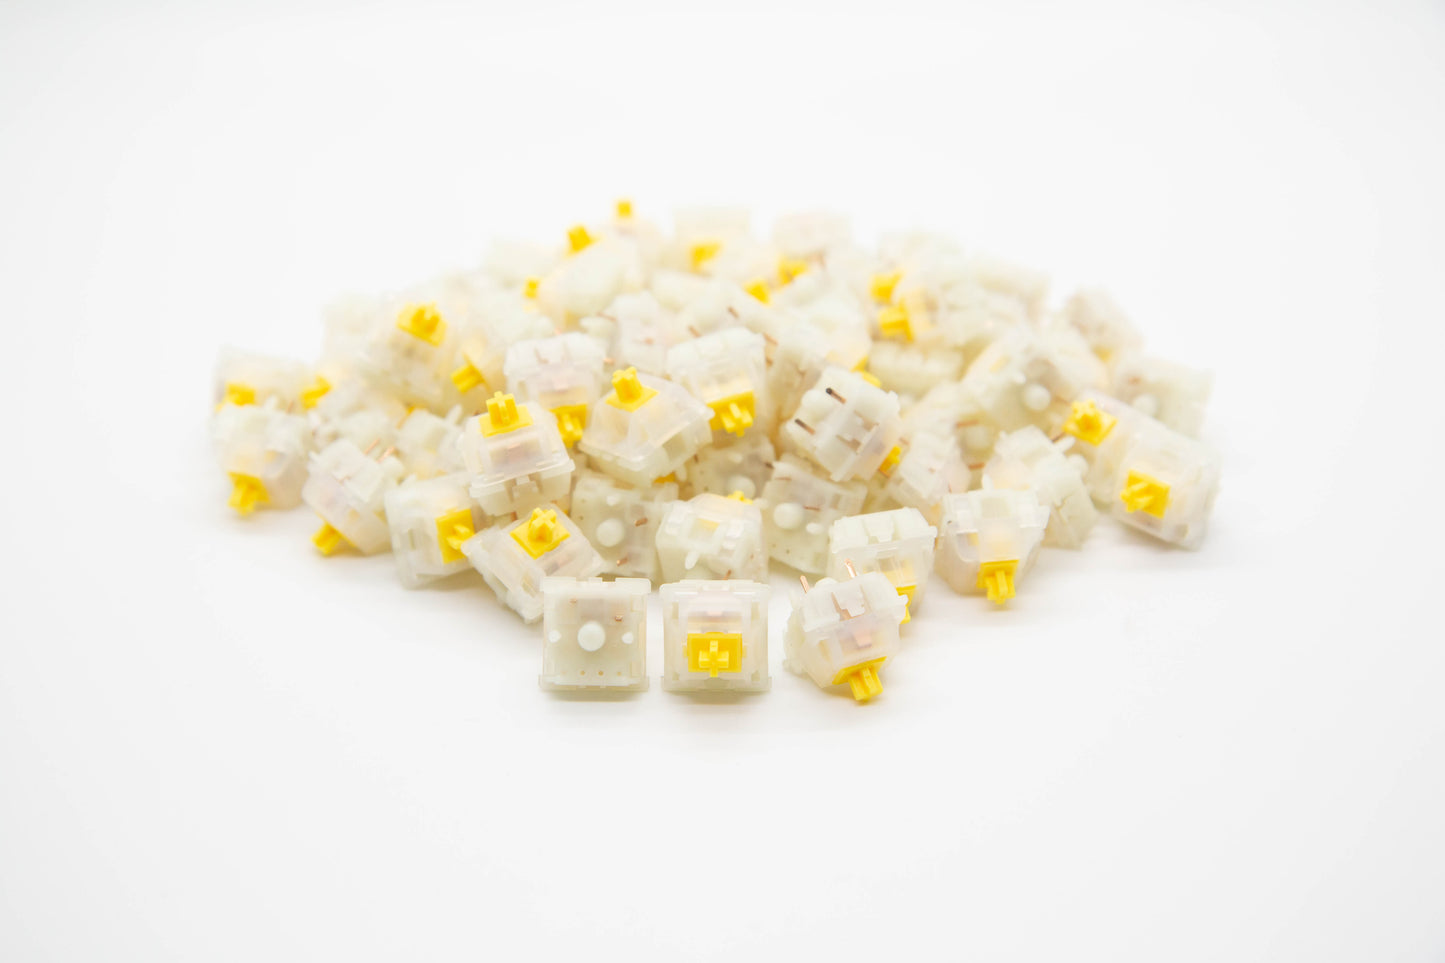 Close-up shot of a pile of Gateron Milky Green mechanical keyboard switches featuring white housing and yellow stems